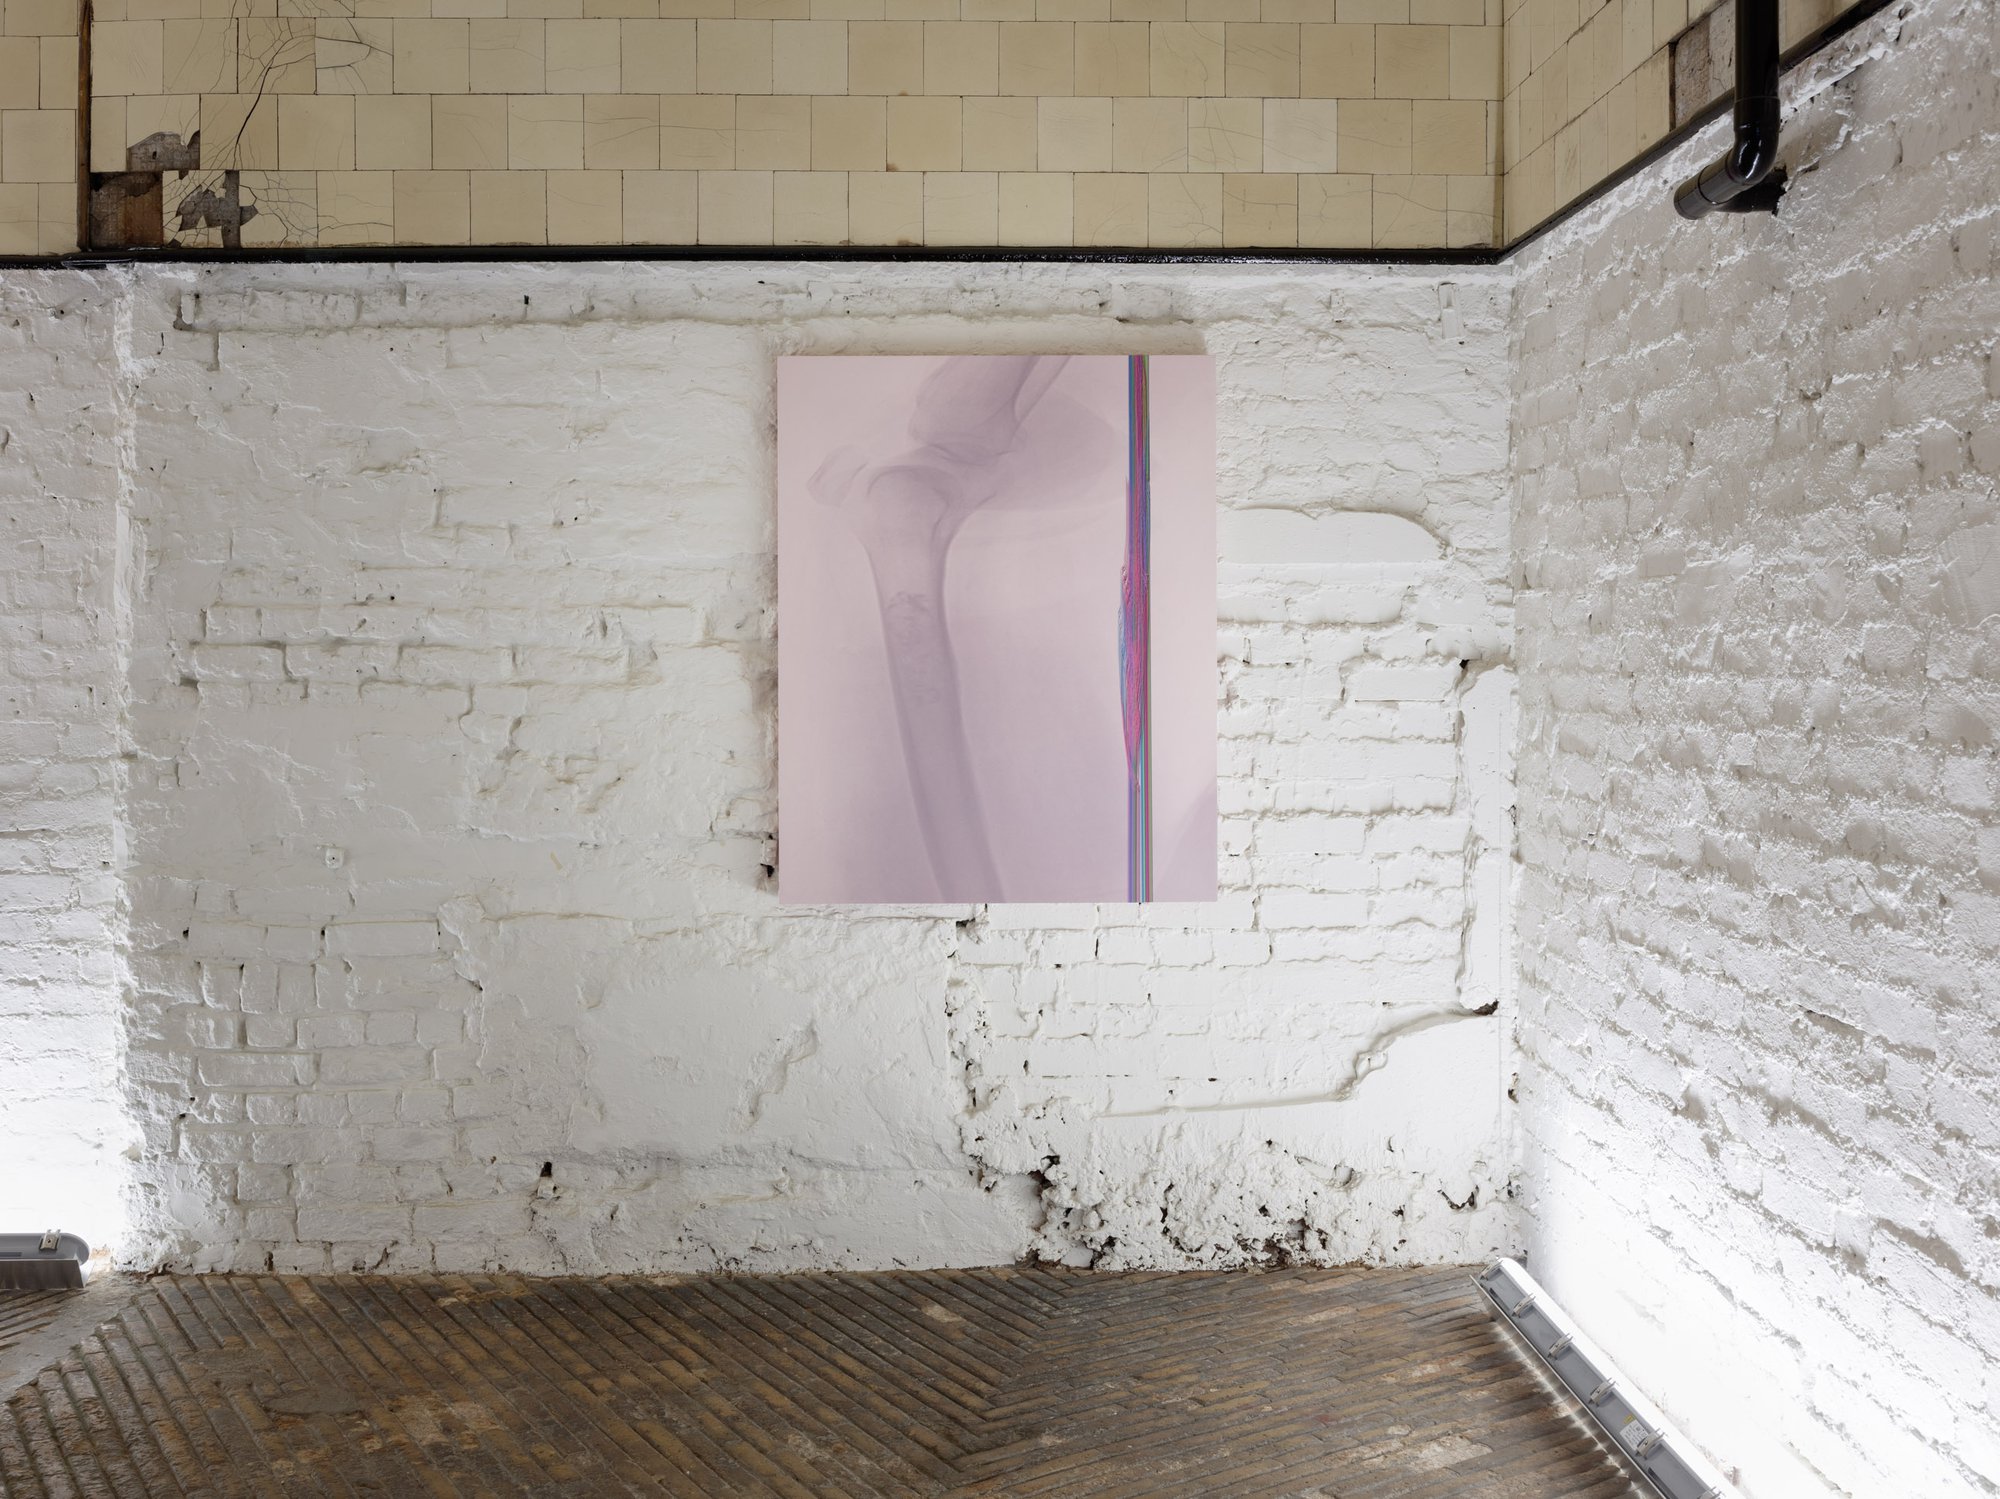 Shahryar Nashat, Untitled, UV print on Hydrocal, gesso, rubber, and powder-coated steel, 108.3 x 87 x 4.4 cm, 2019. Installation view, Bad House, Rodeo, London, 2020